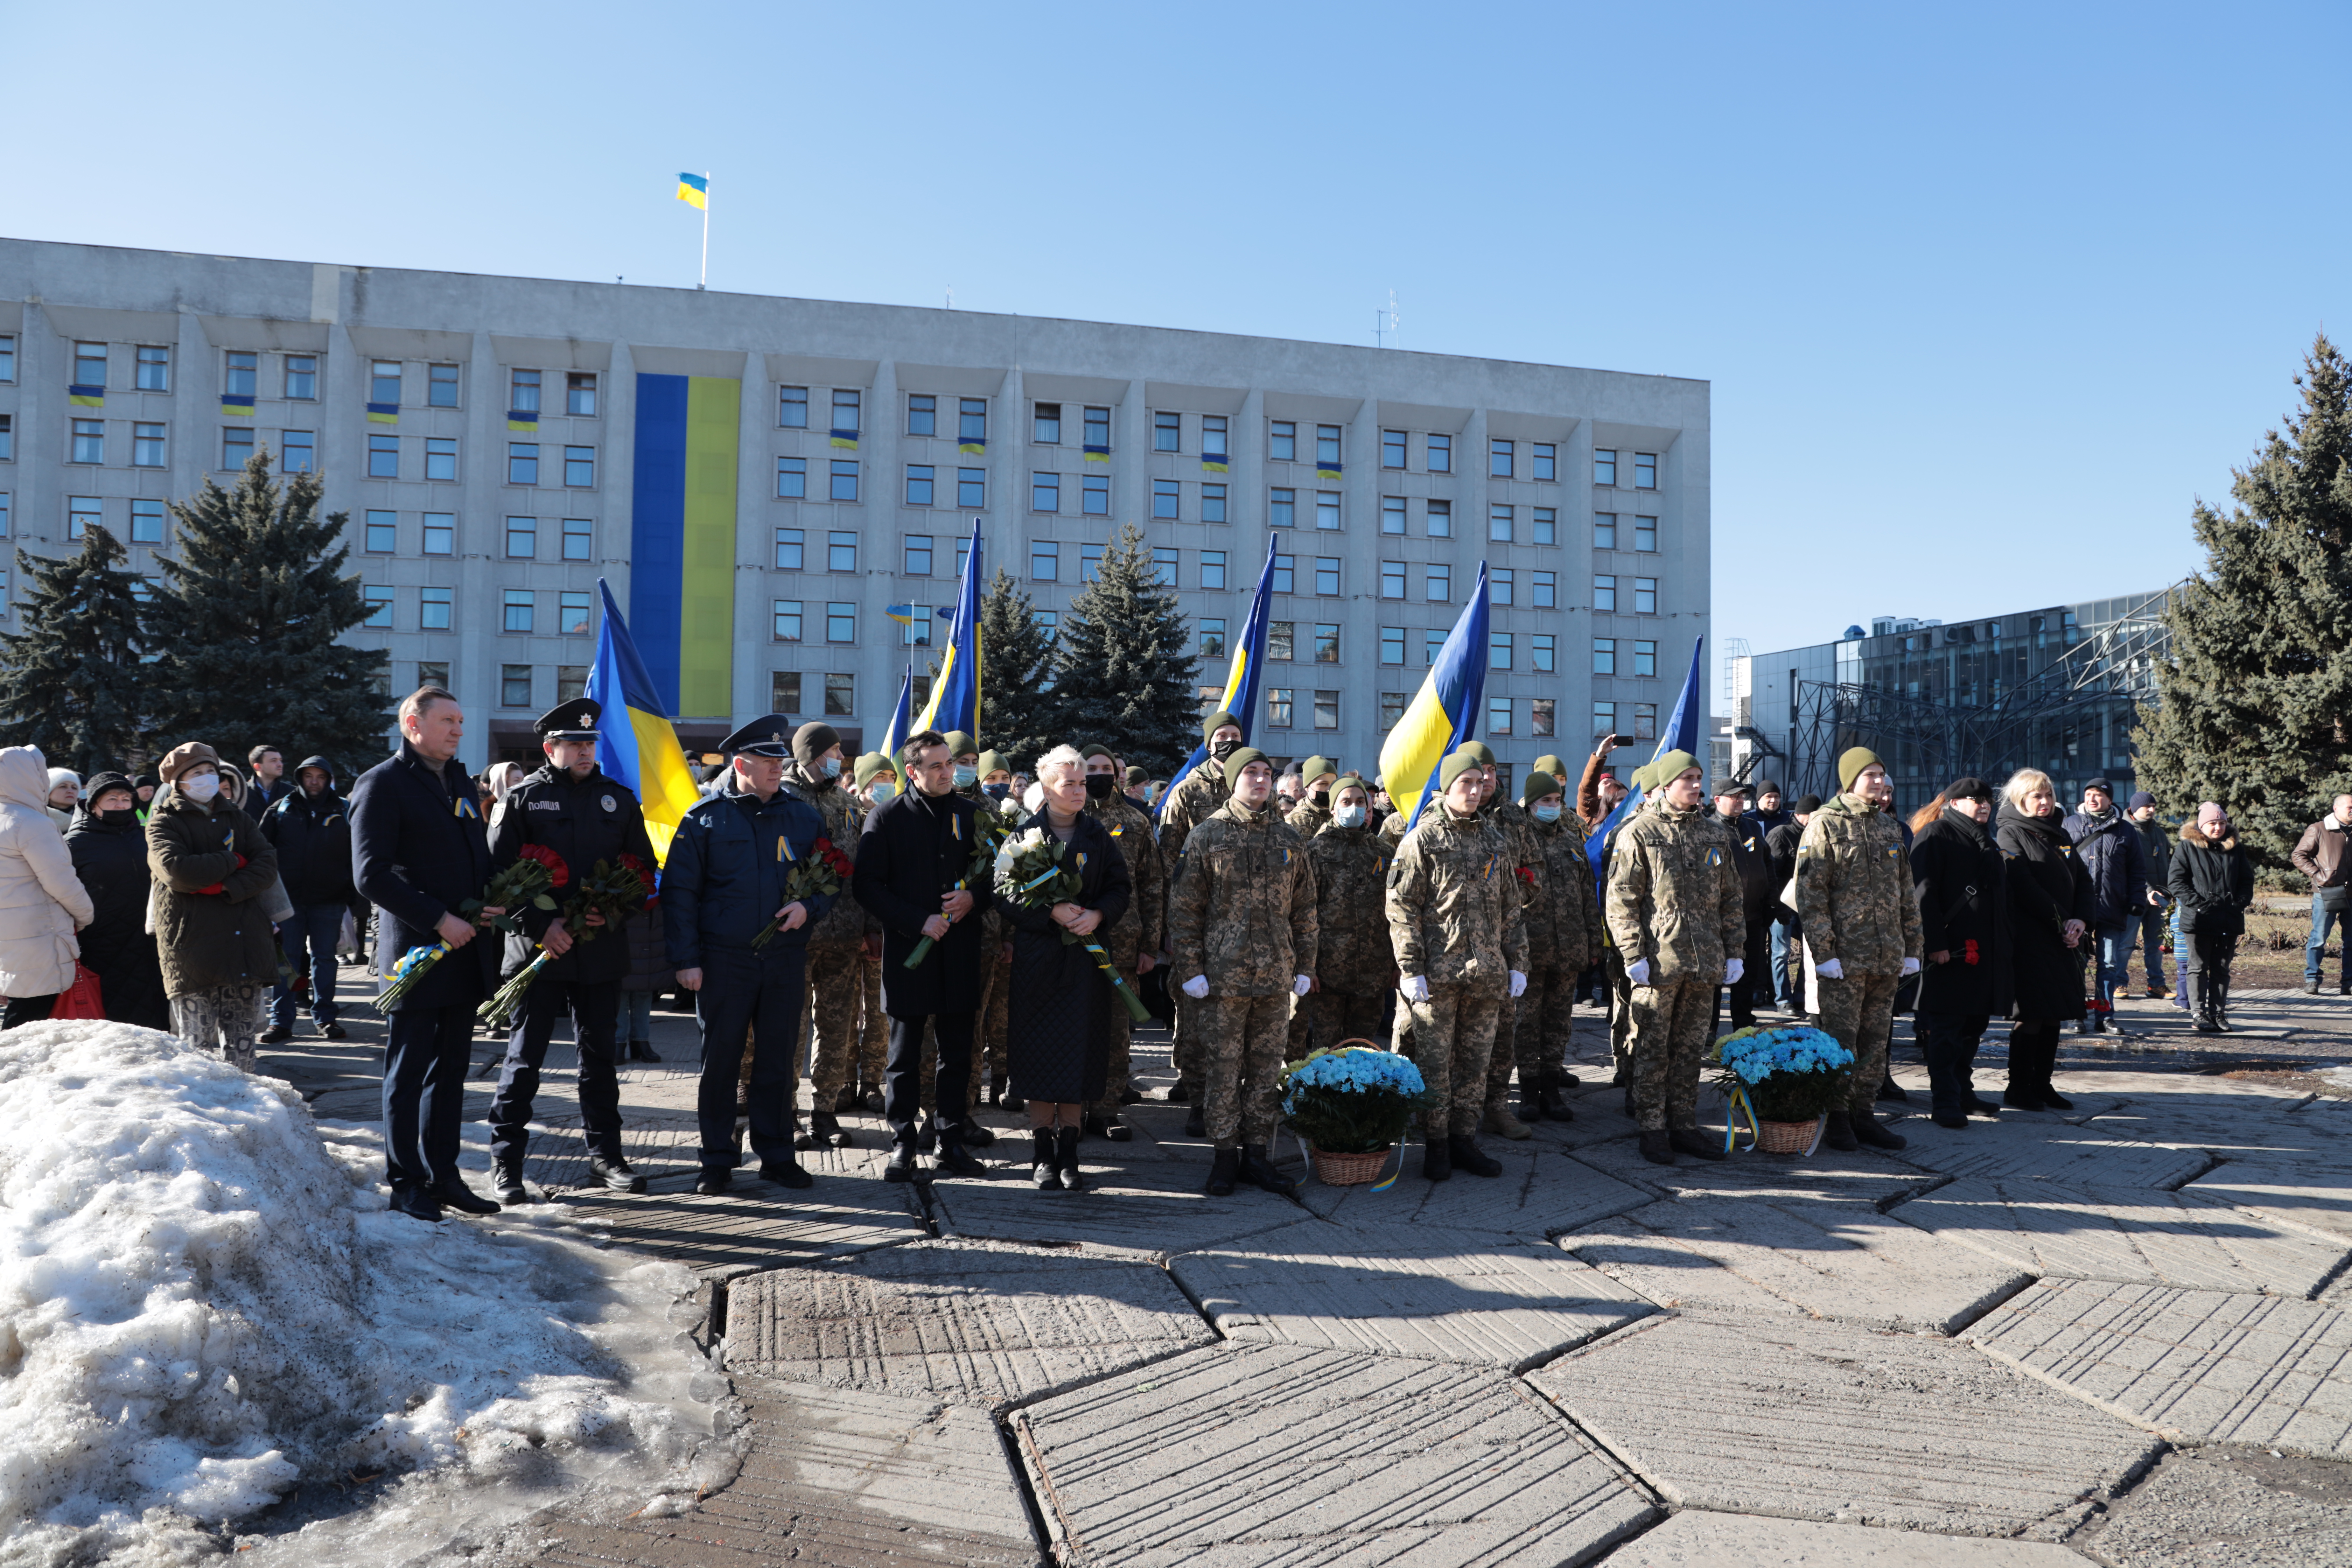 The university community joins the public commemoration of the Heroes of the Heavenly Hundred